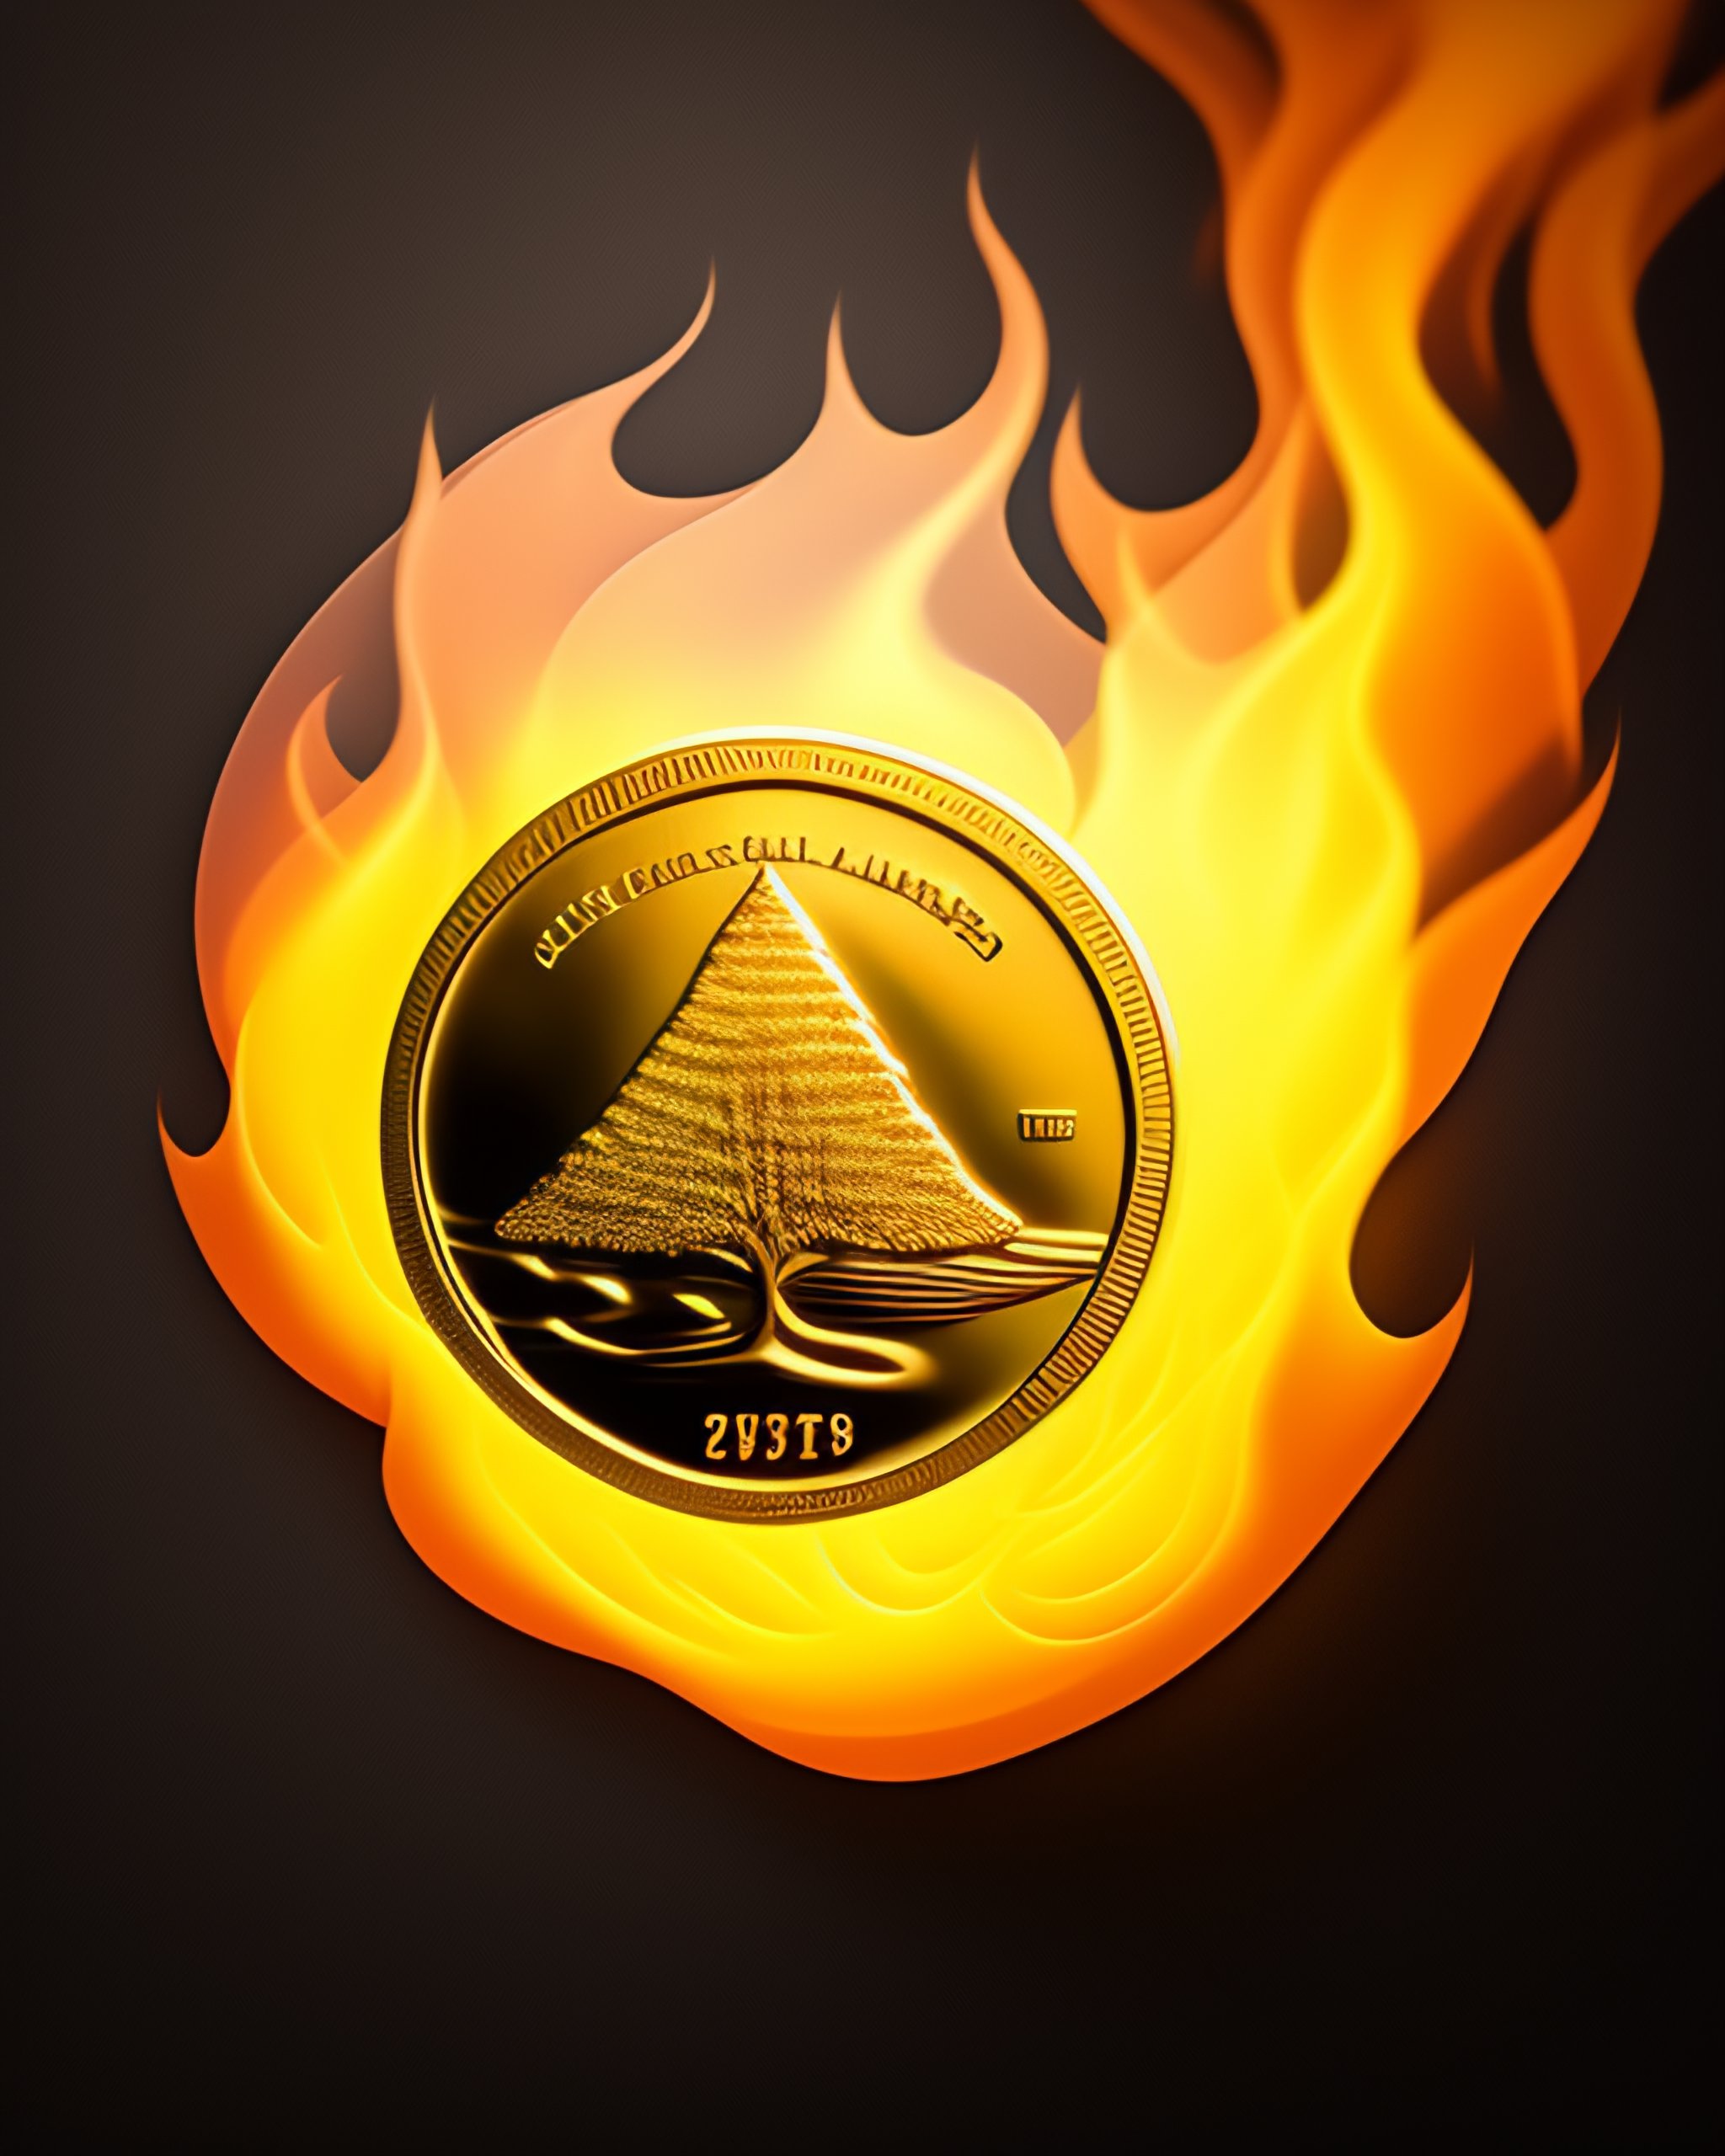 Lexica - A blank coin engulfed in flames, coin is a gold color